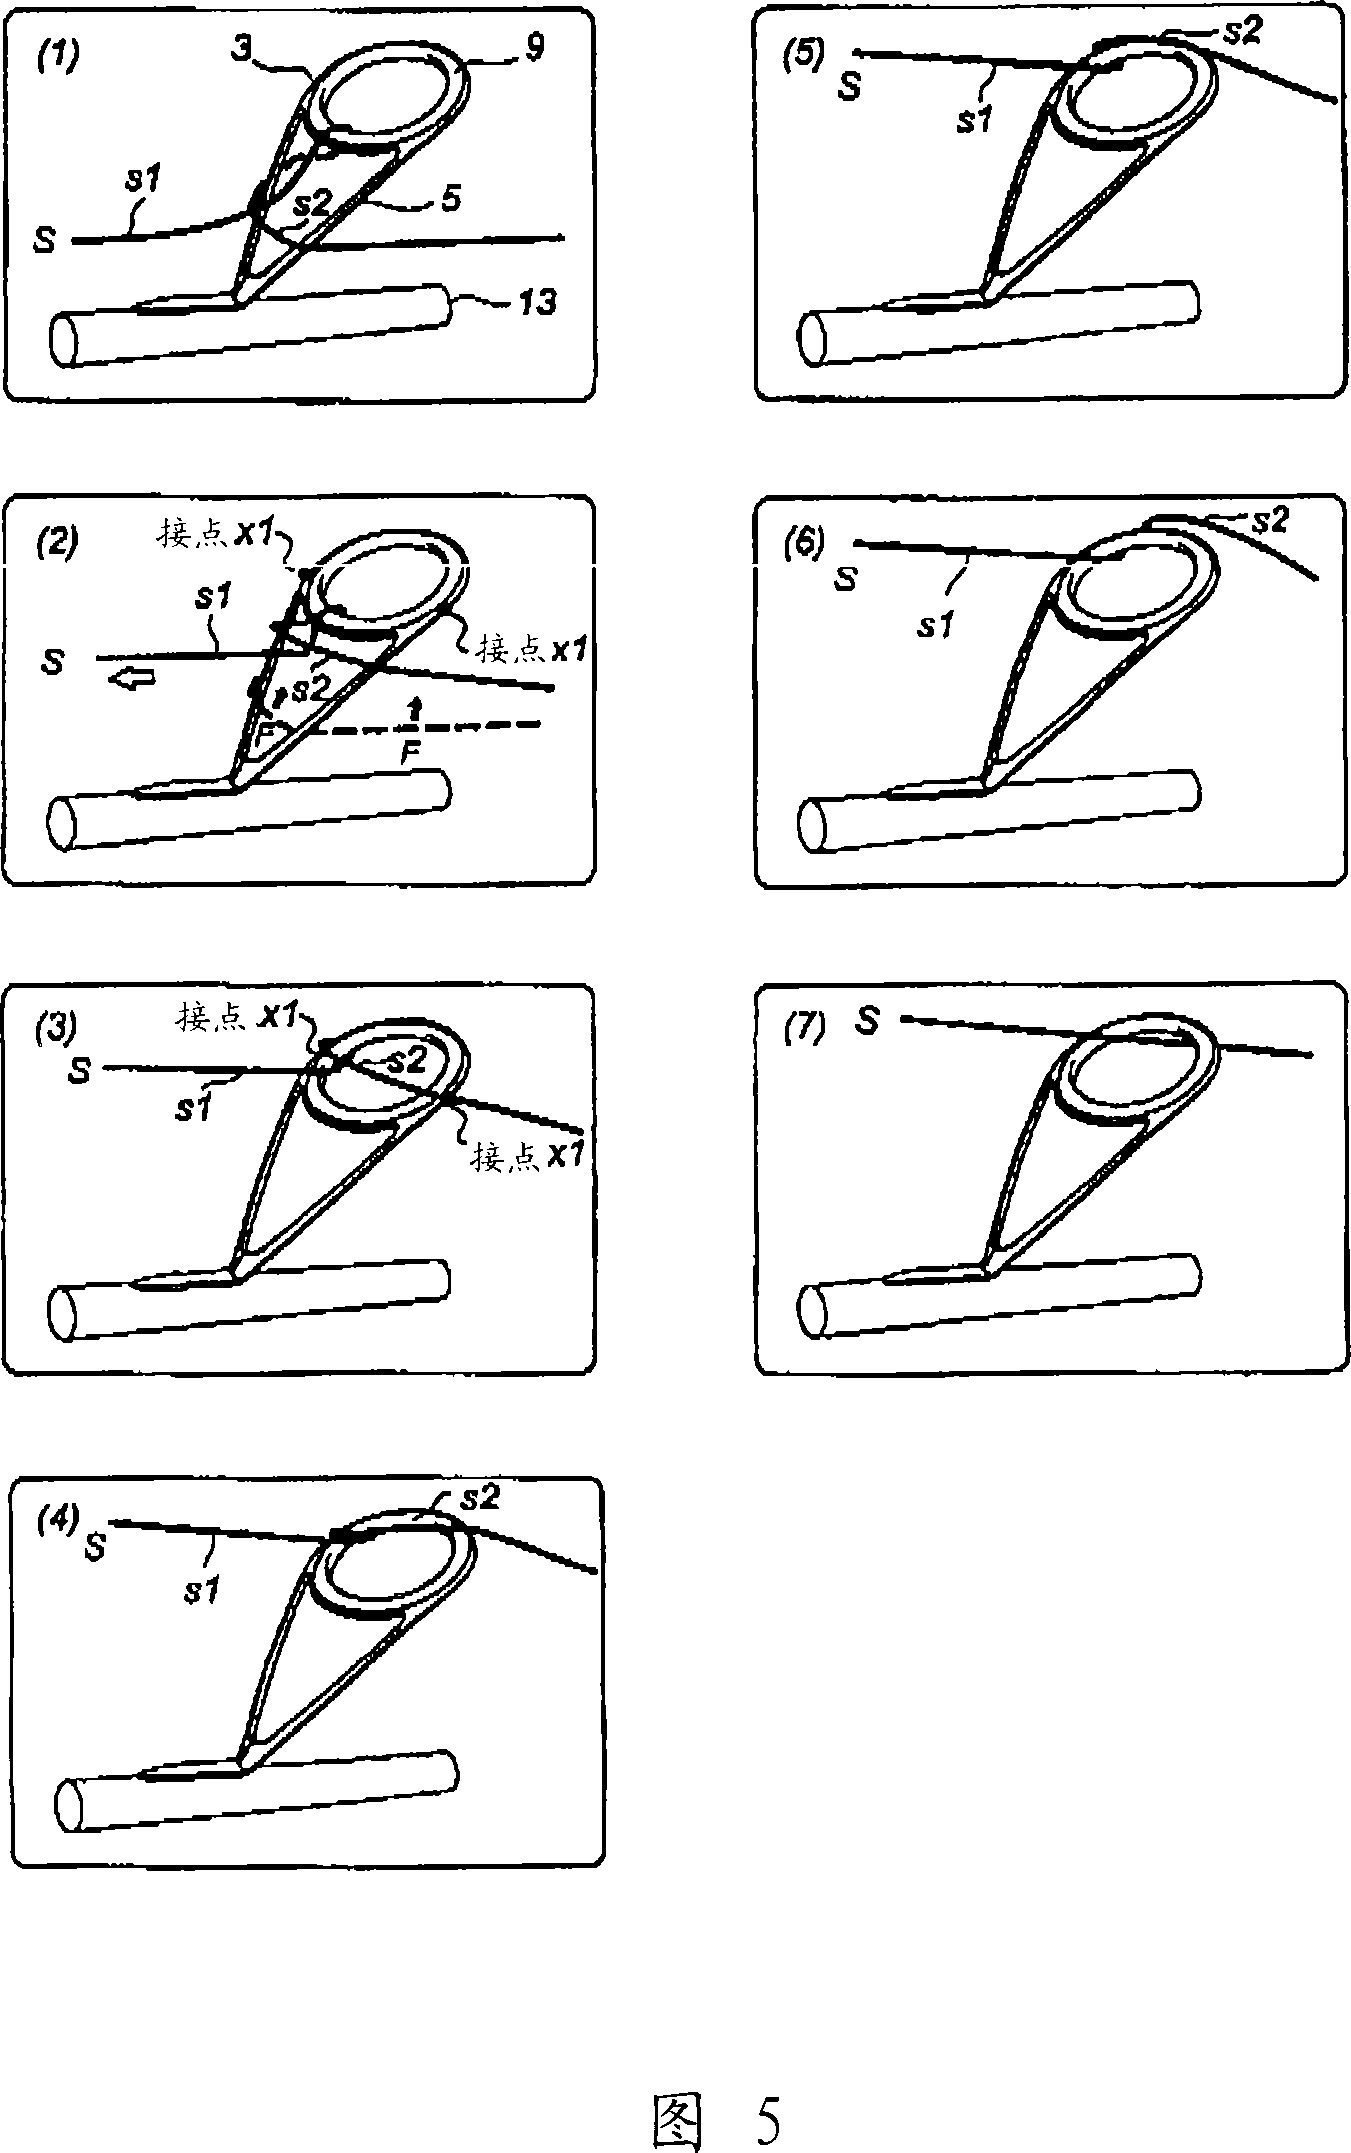 Fishing line guide device